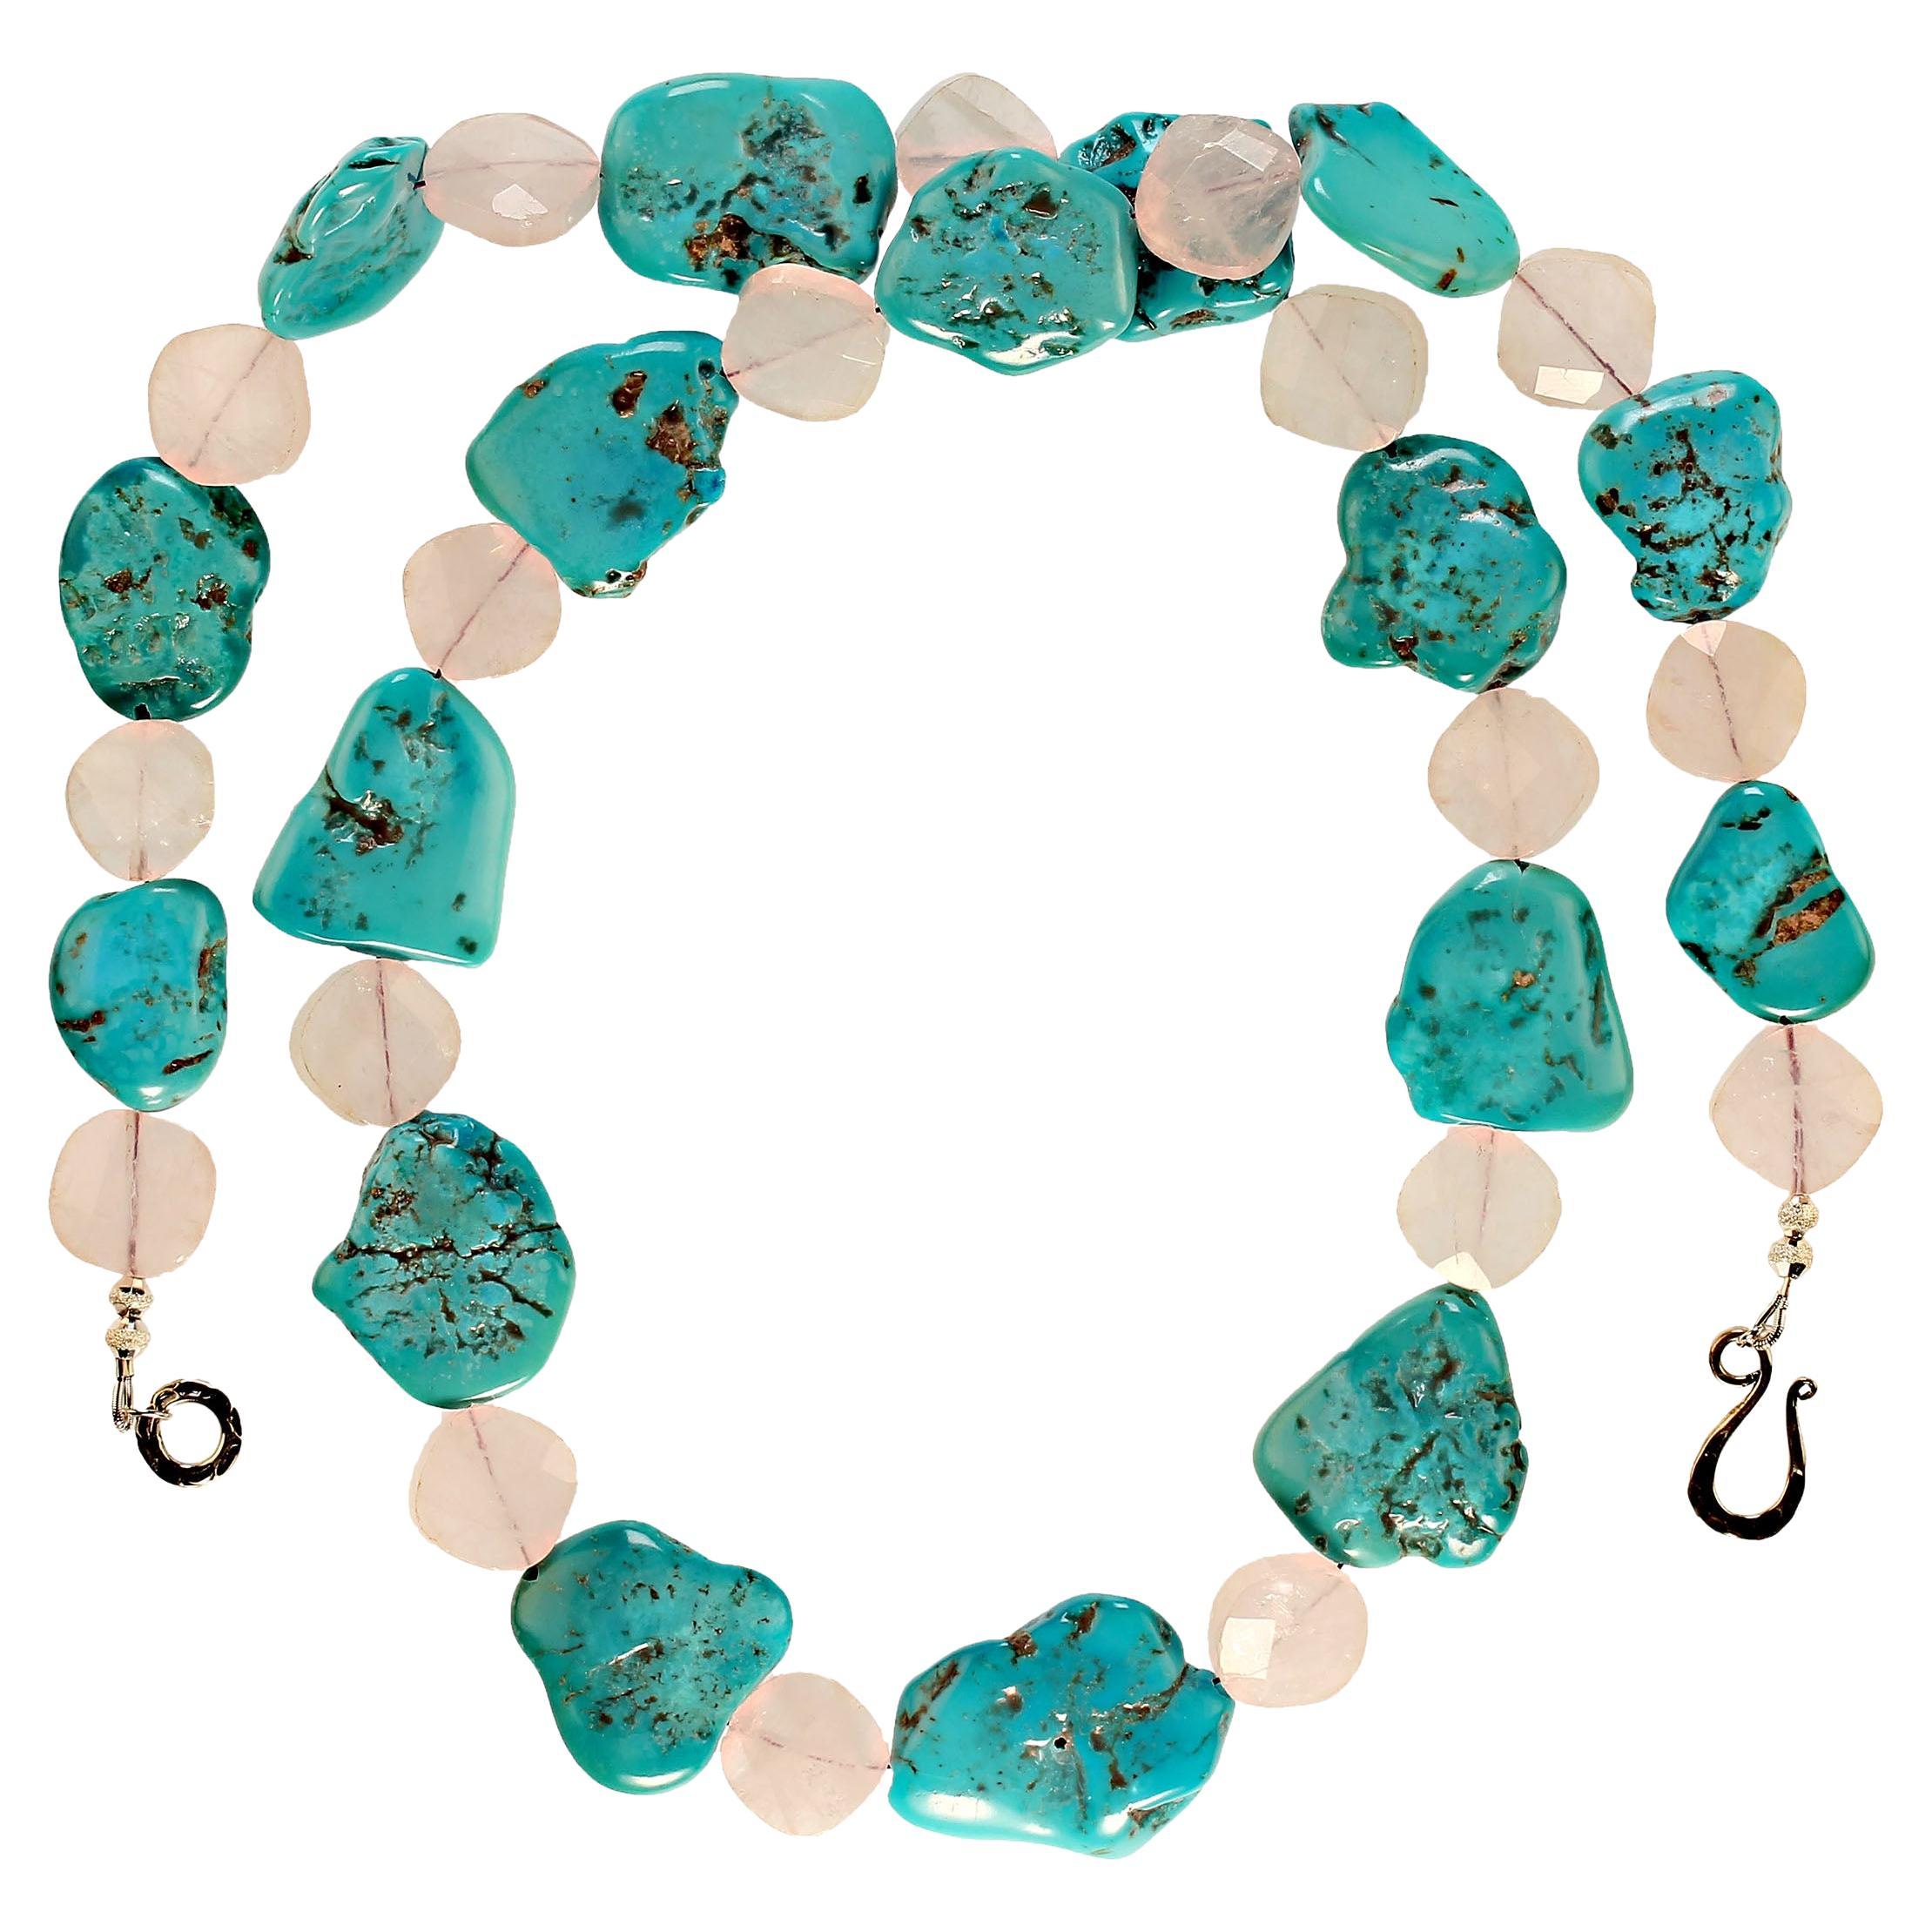 Artisan AJD 29 Inch Sleeping Beauty Turquoise and Rose Quartz necklace  Great Gift! For Sale